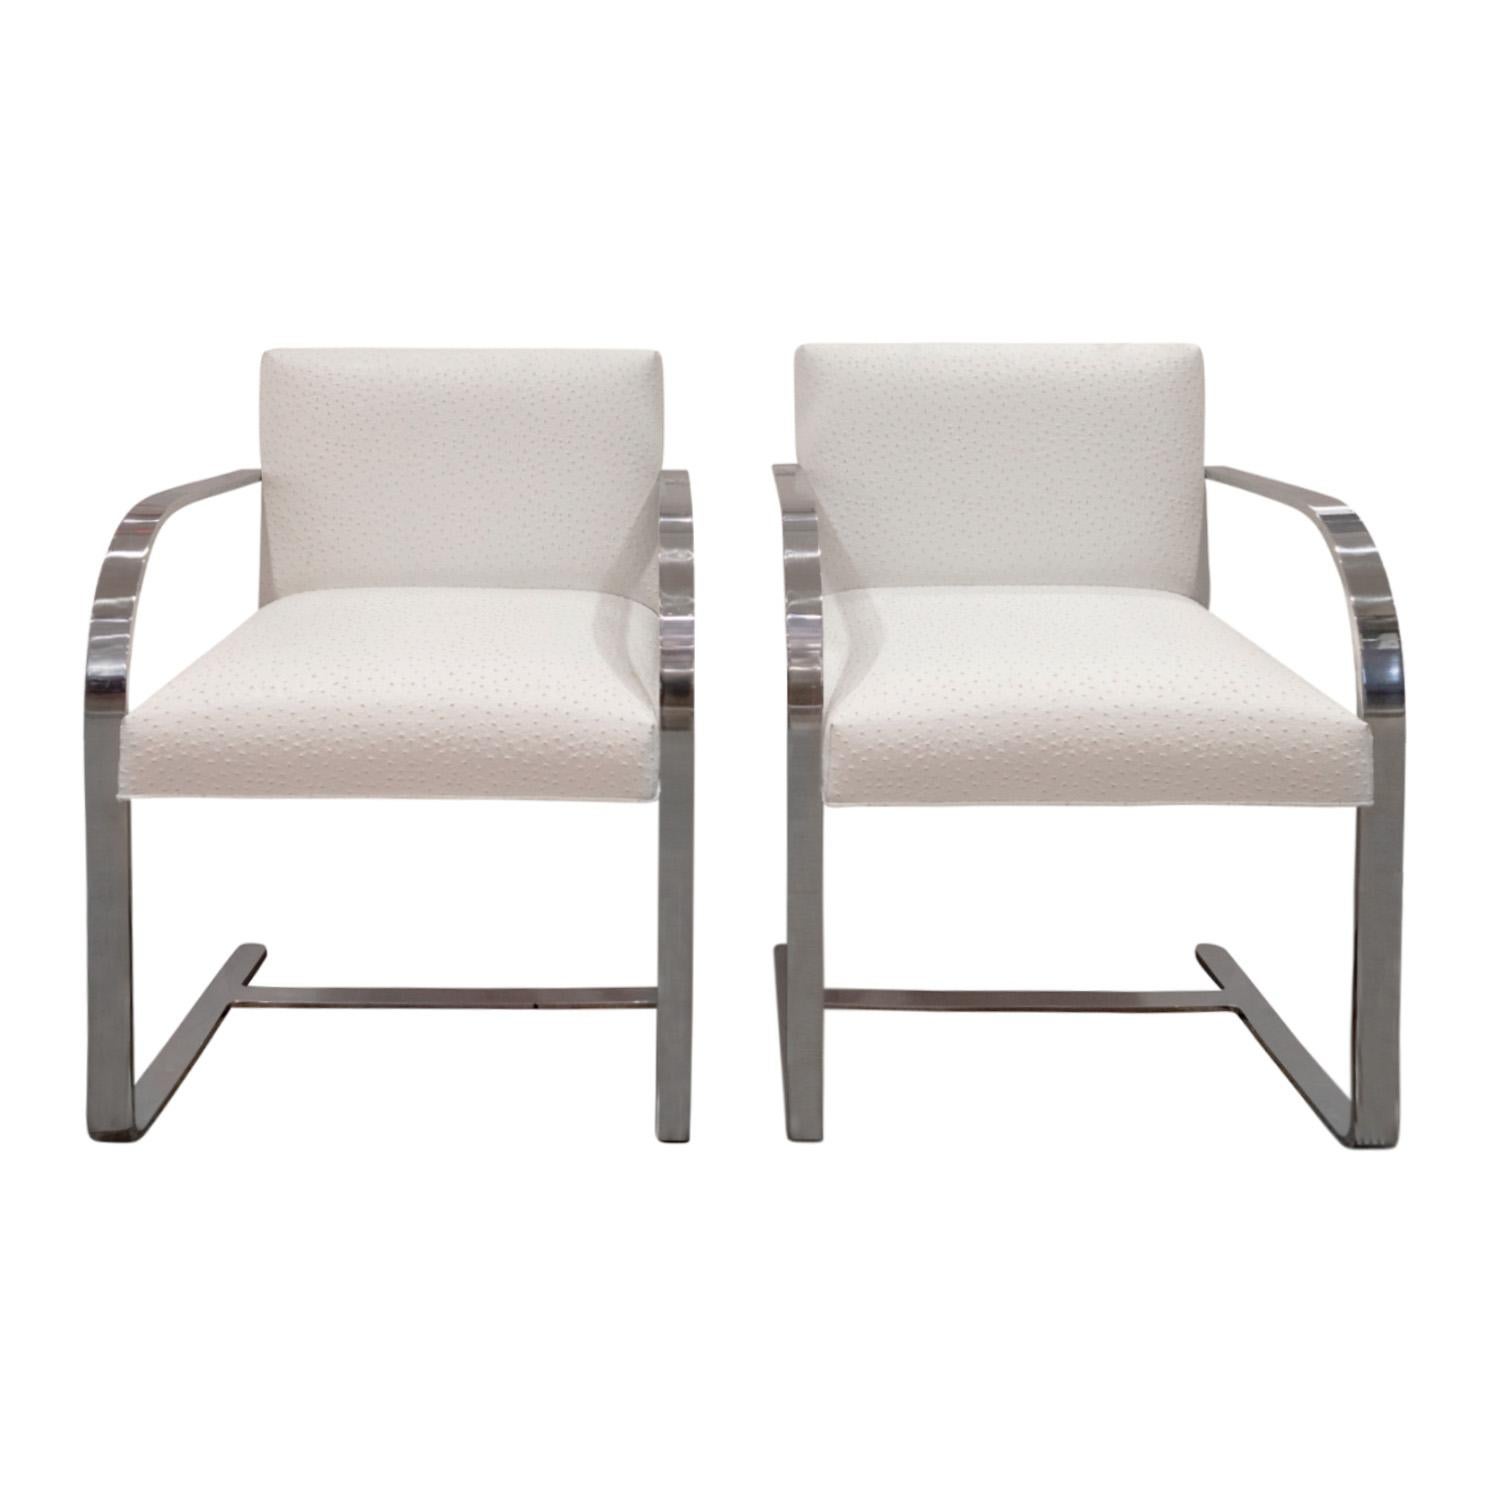 Mid-Century Modern Mies Van Der Rohe Chic Pair of Brno Arm Chairs in Ostrich Leather, 1990s